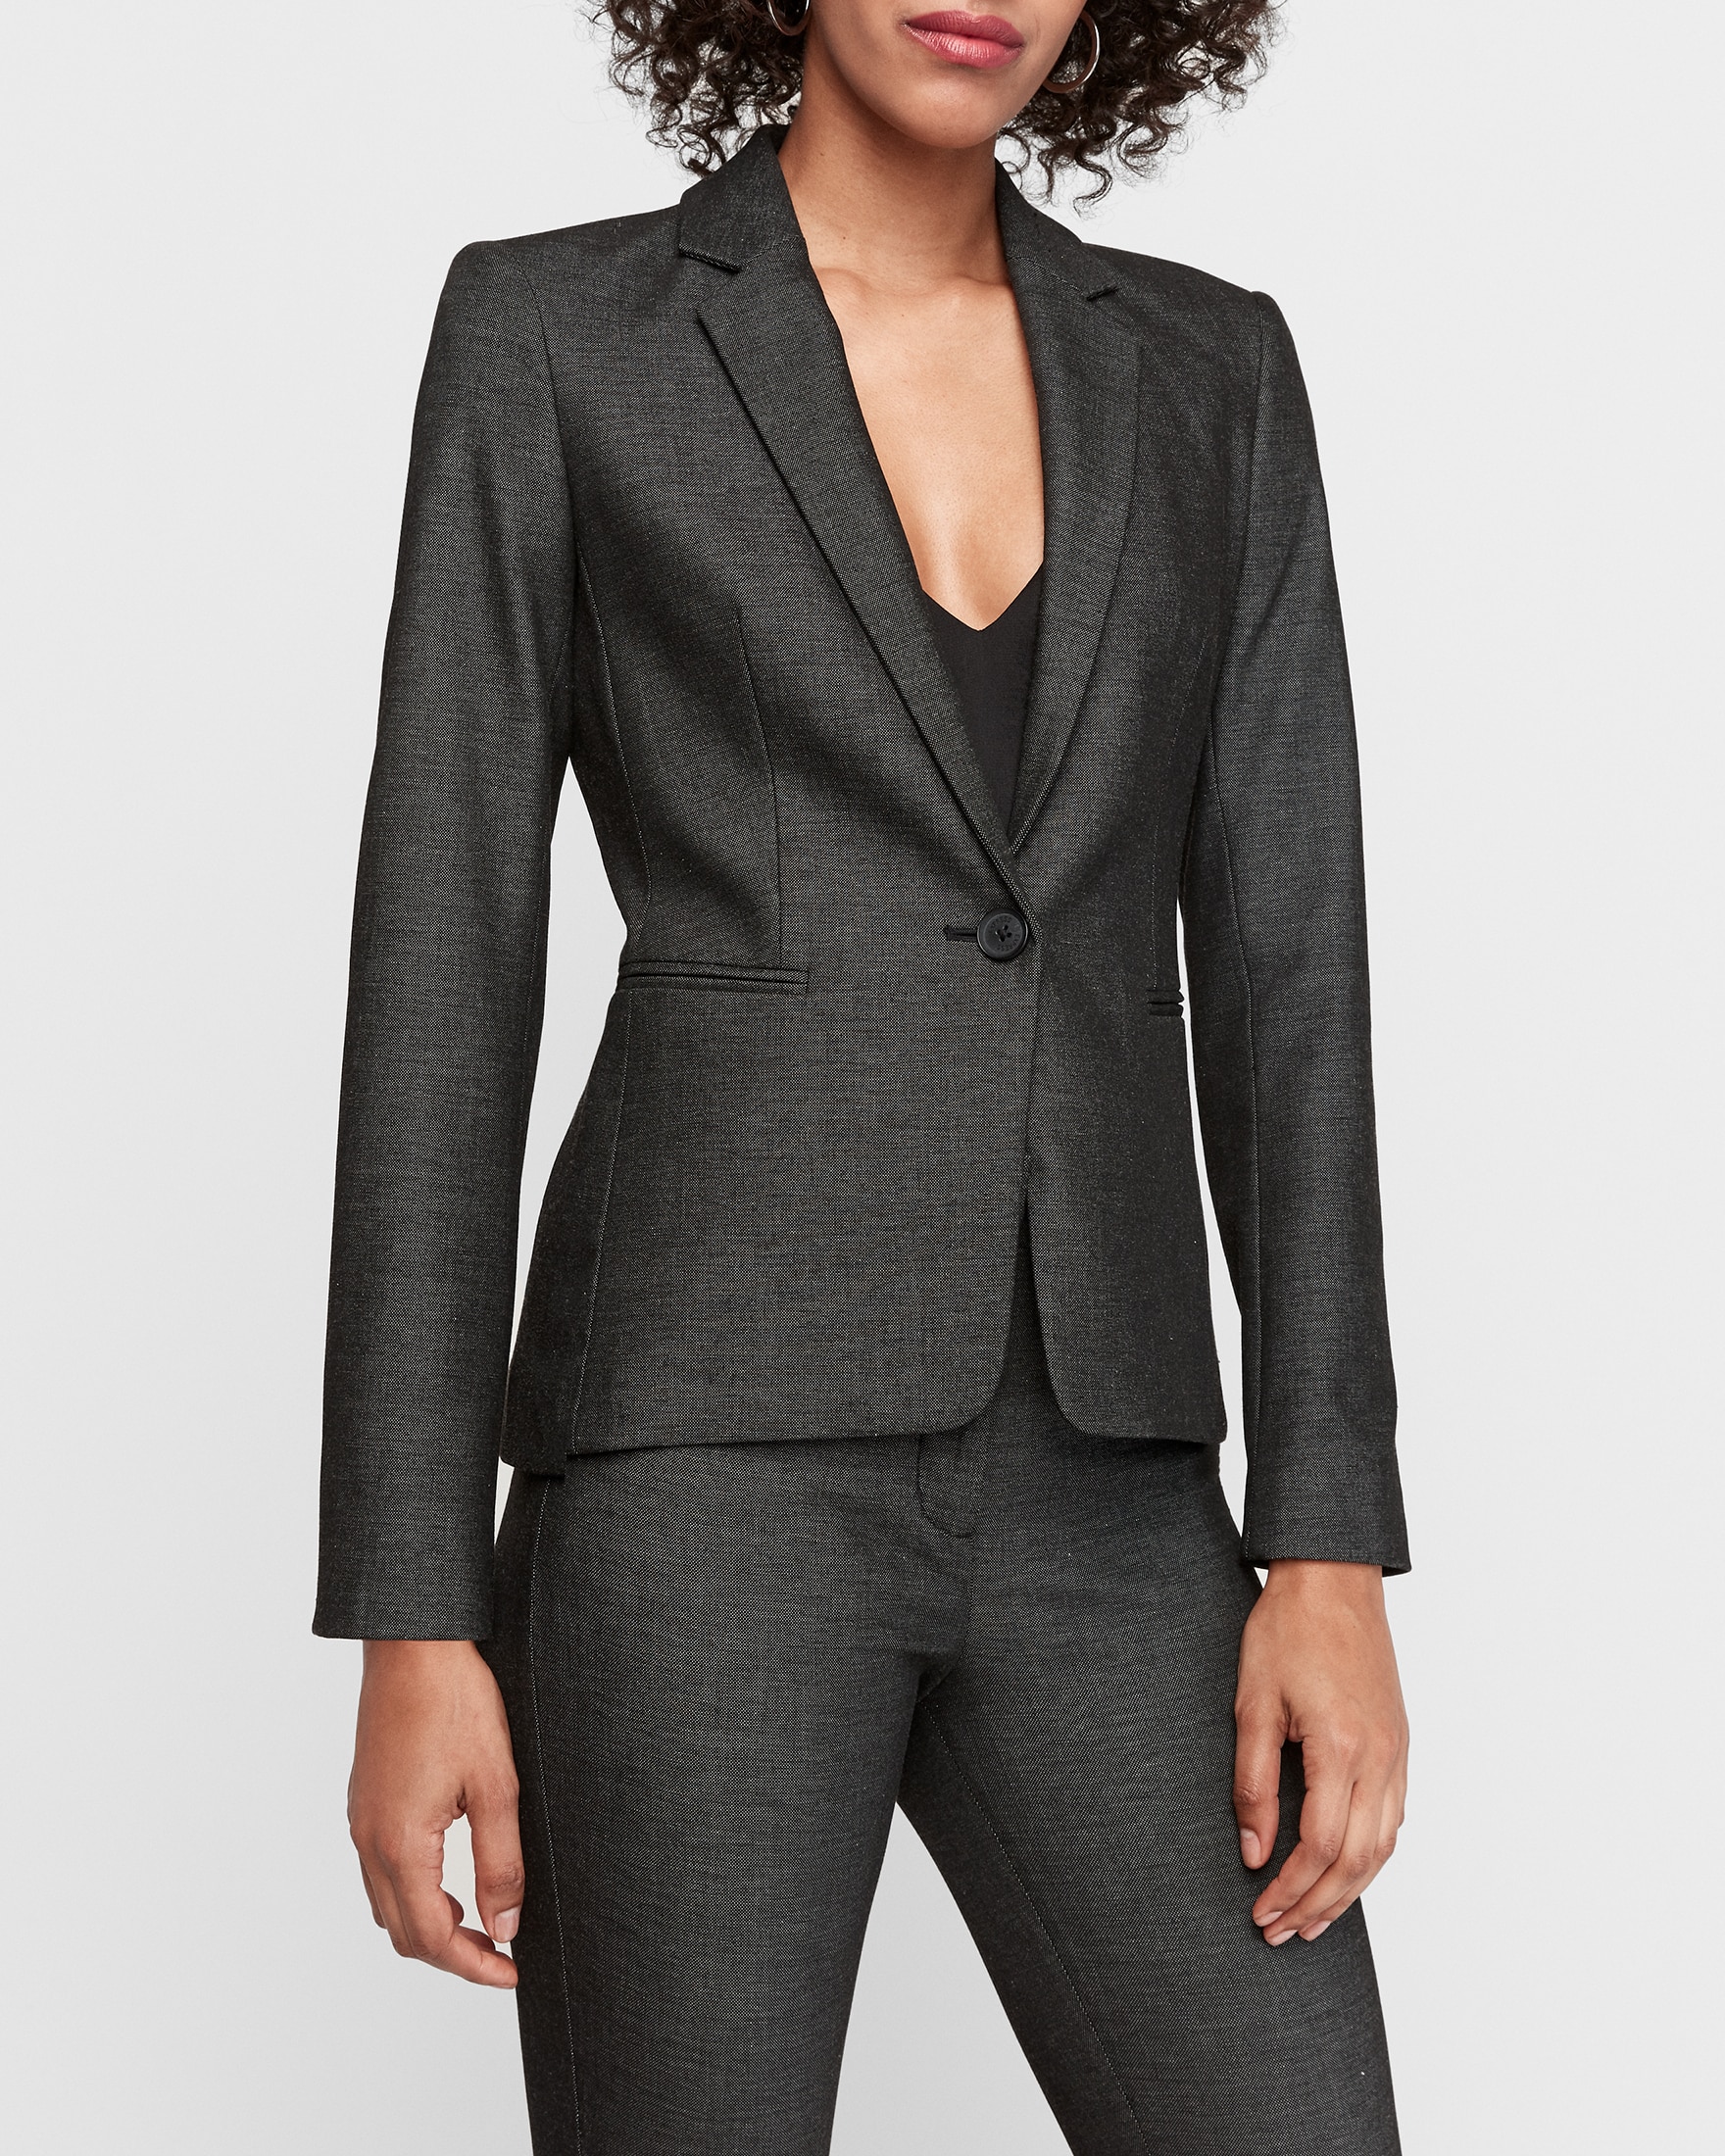 womens pant suit for interview